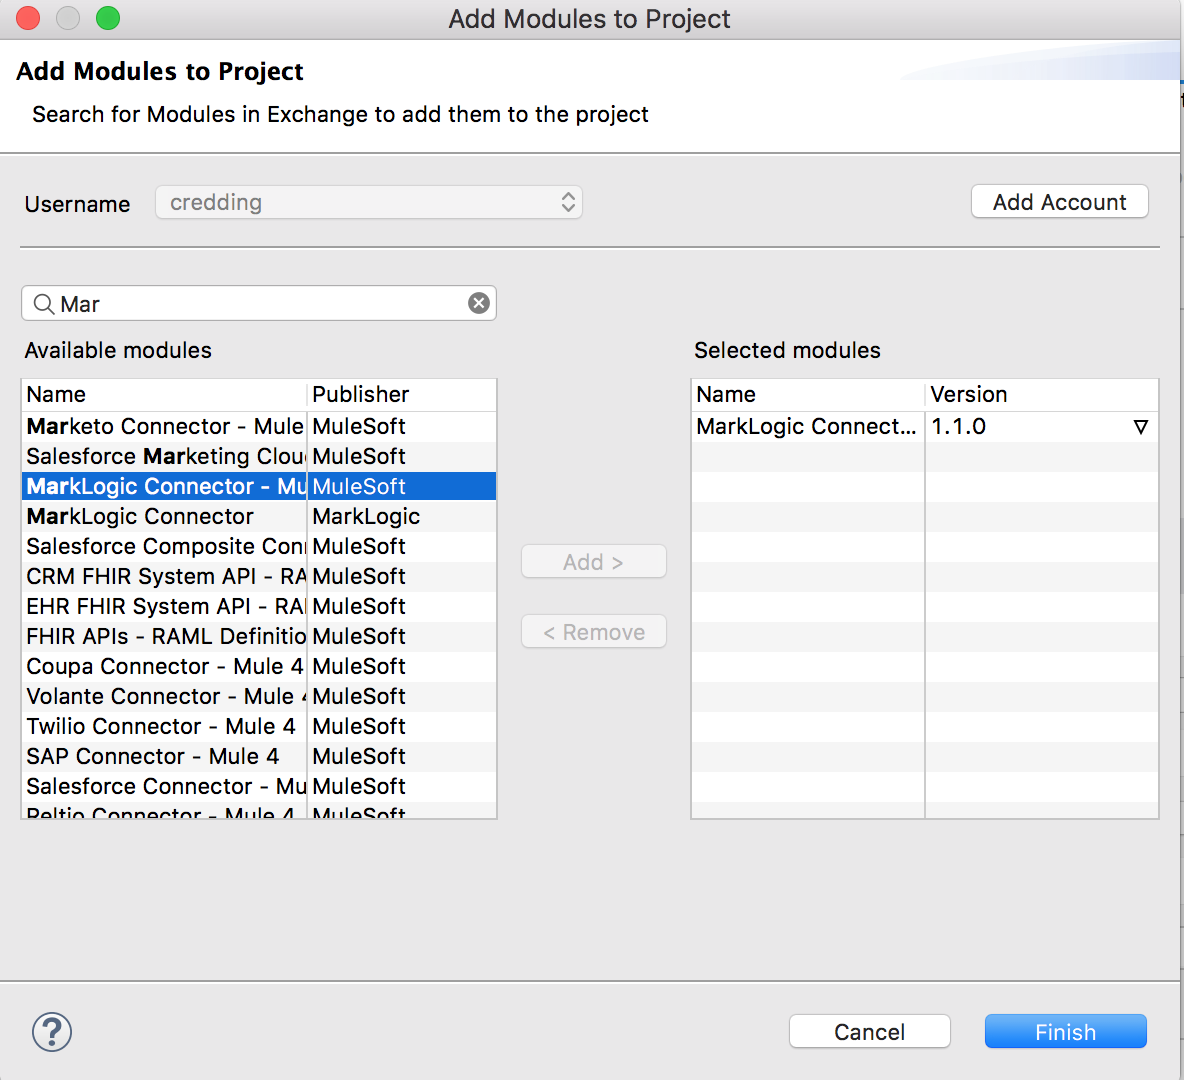 Searching and adding MarkLogic 1.1.0 in Add Modules